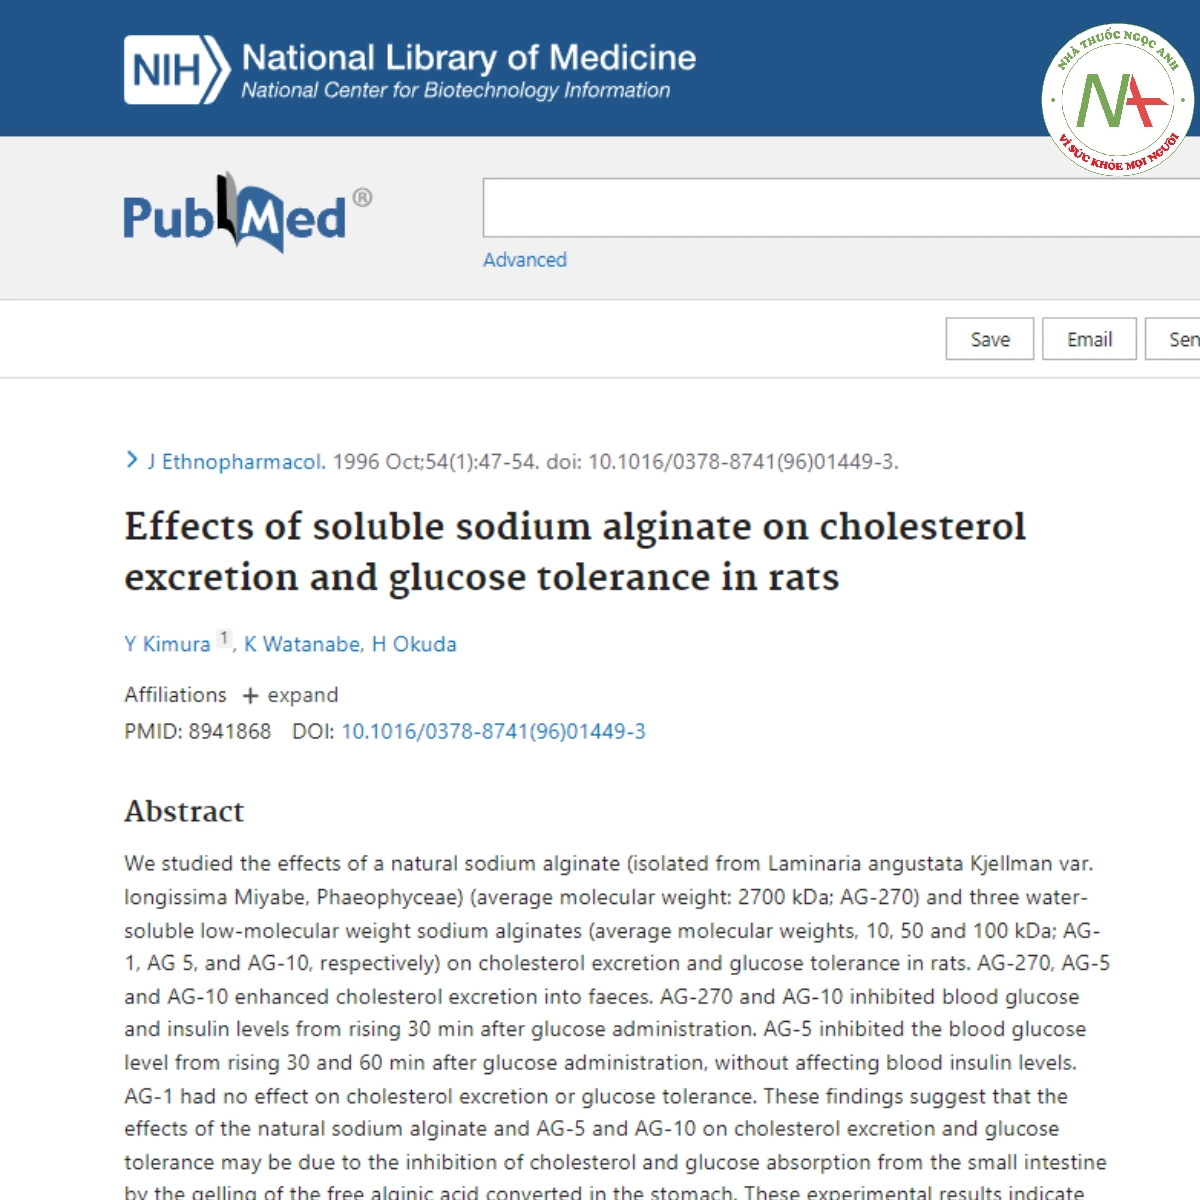 Effects of soluble sodium alginate on cholesterol excretion and glucose tolerance in rats